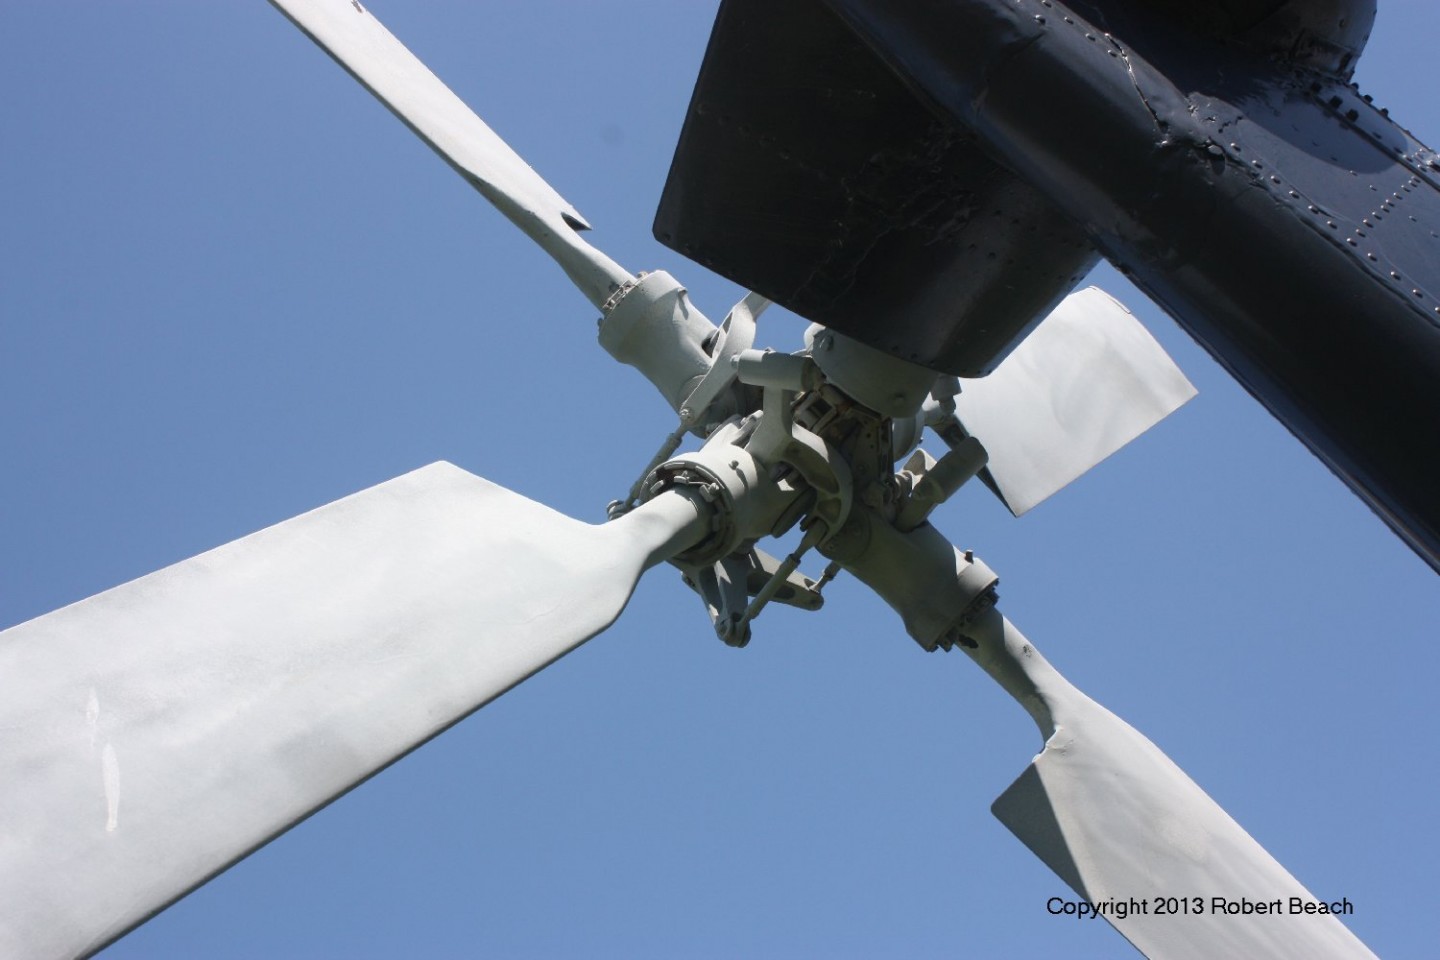 tailrotor_frm strd aft